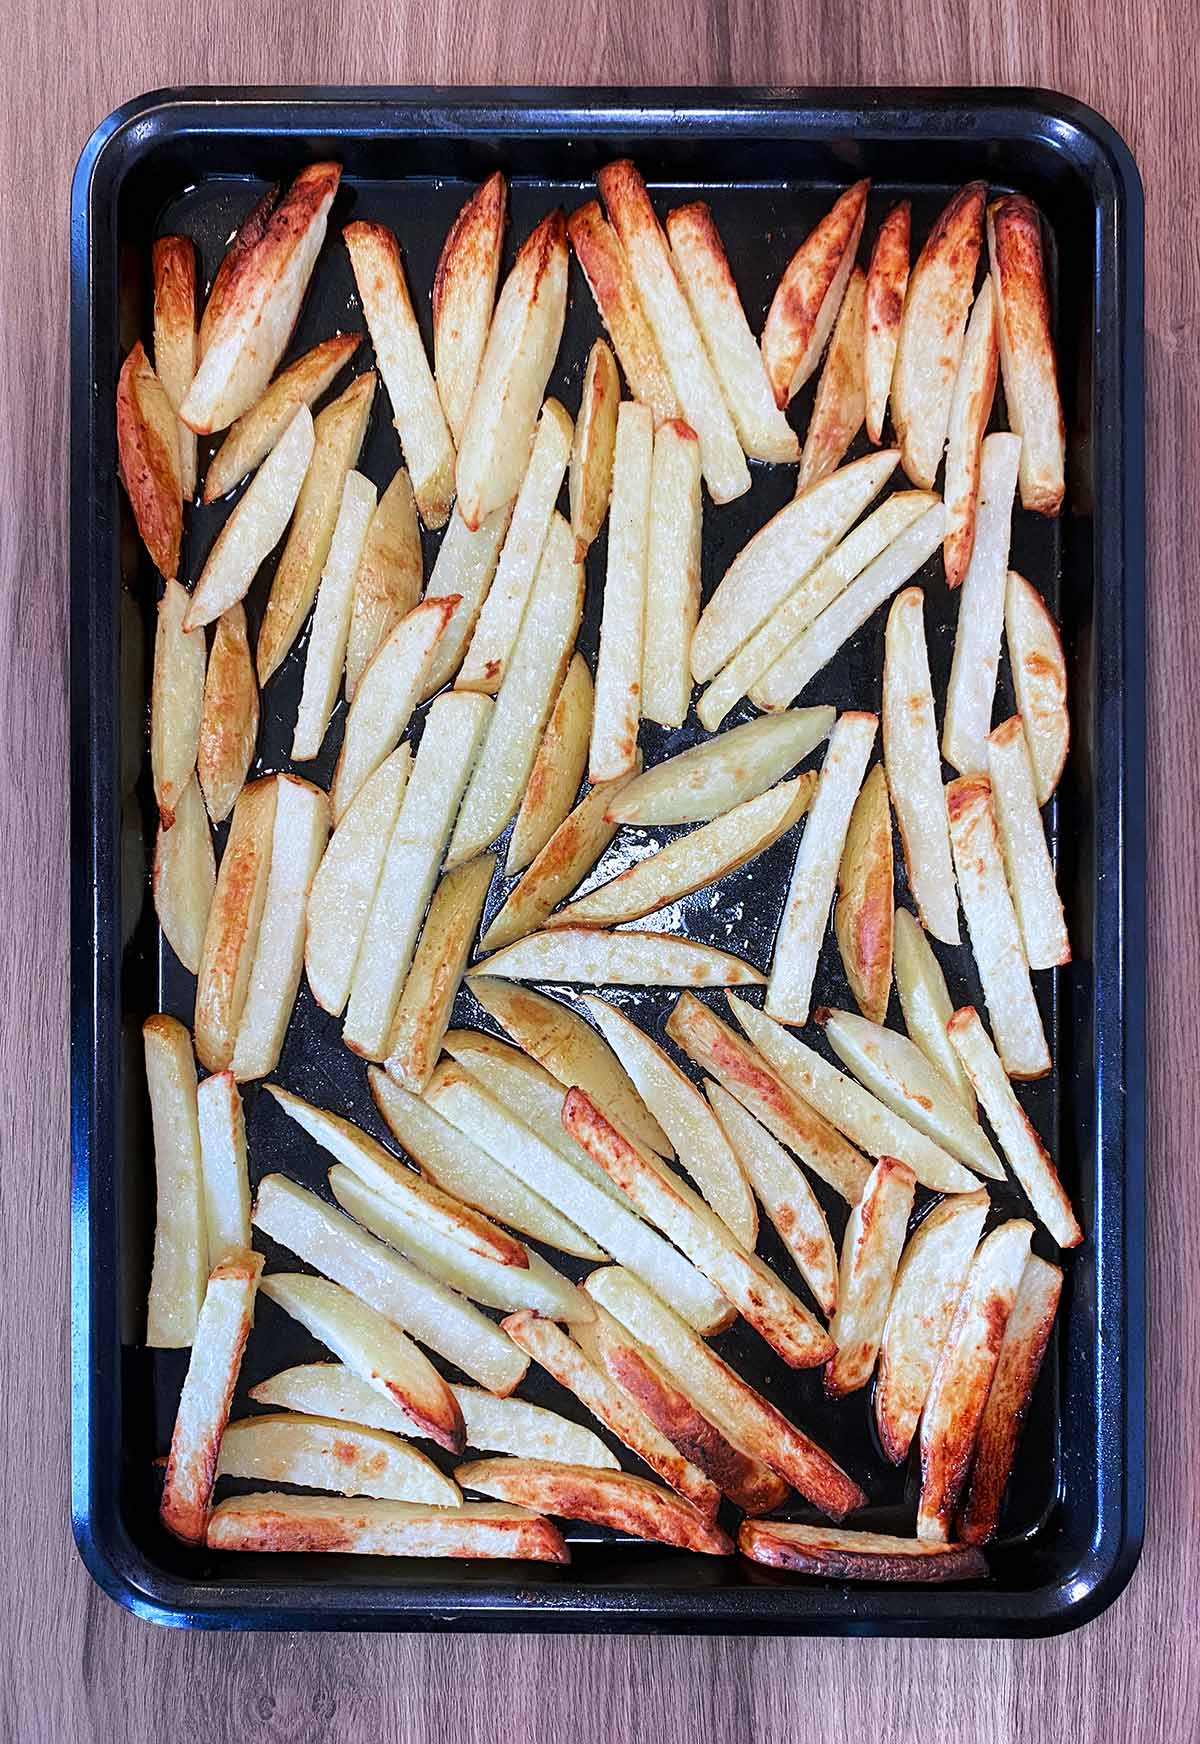 Cooked chips on a baking tray.